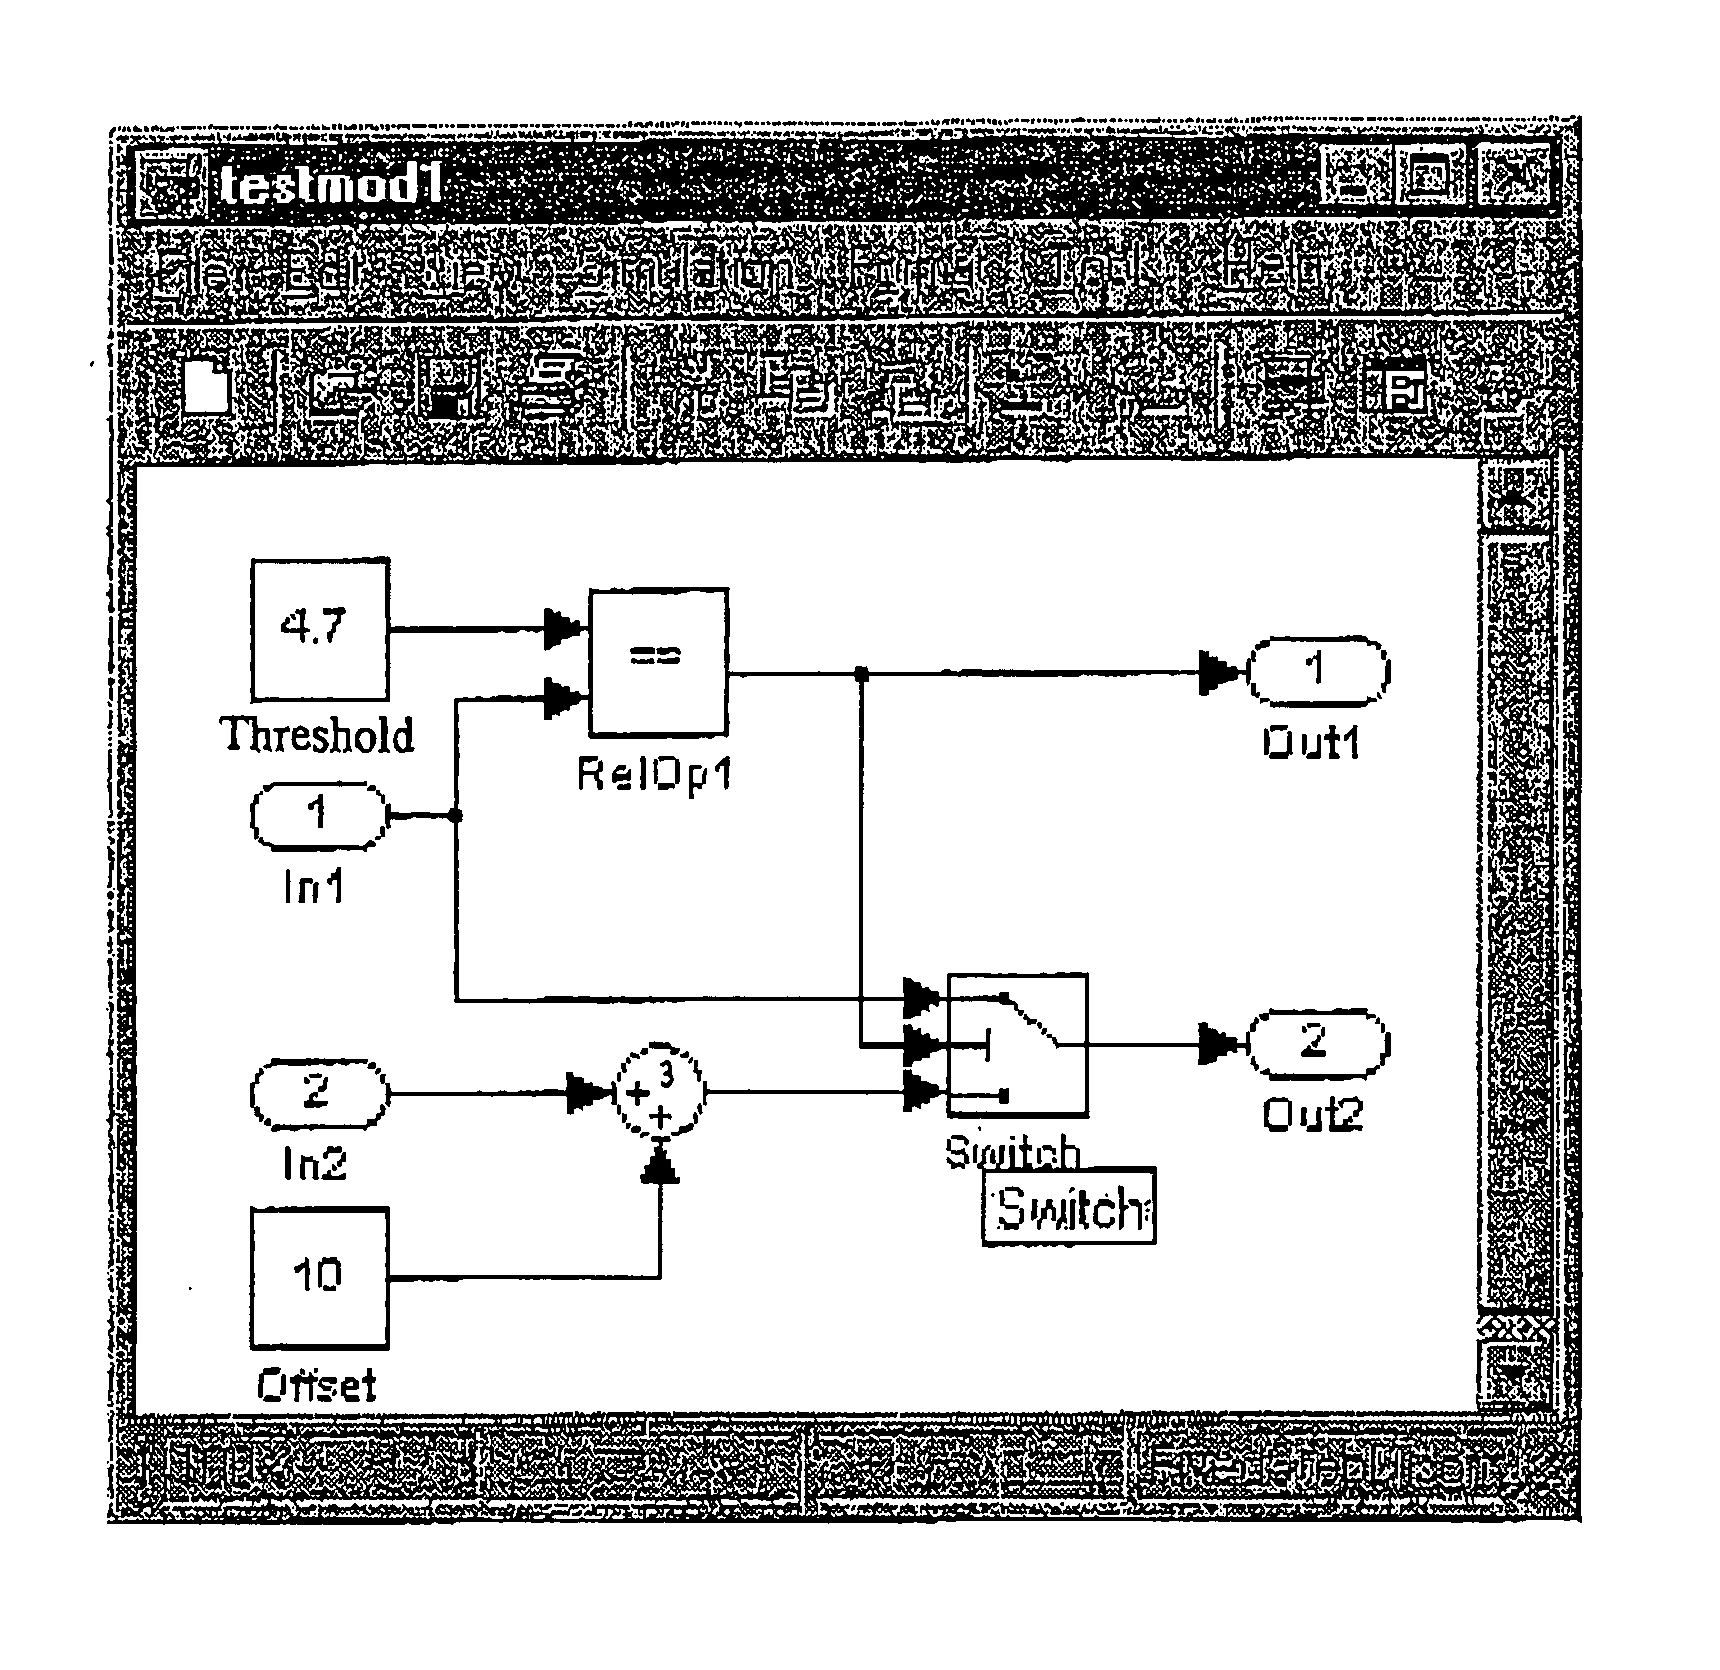 Method for the creation of sequences for testing software